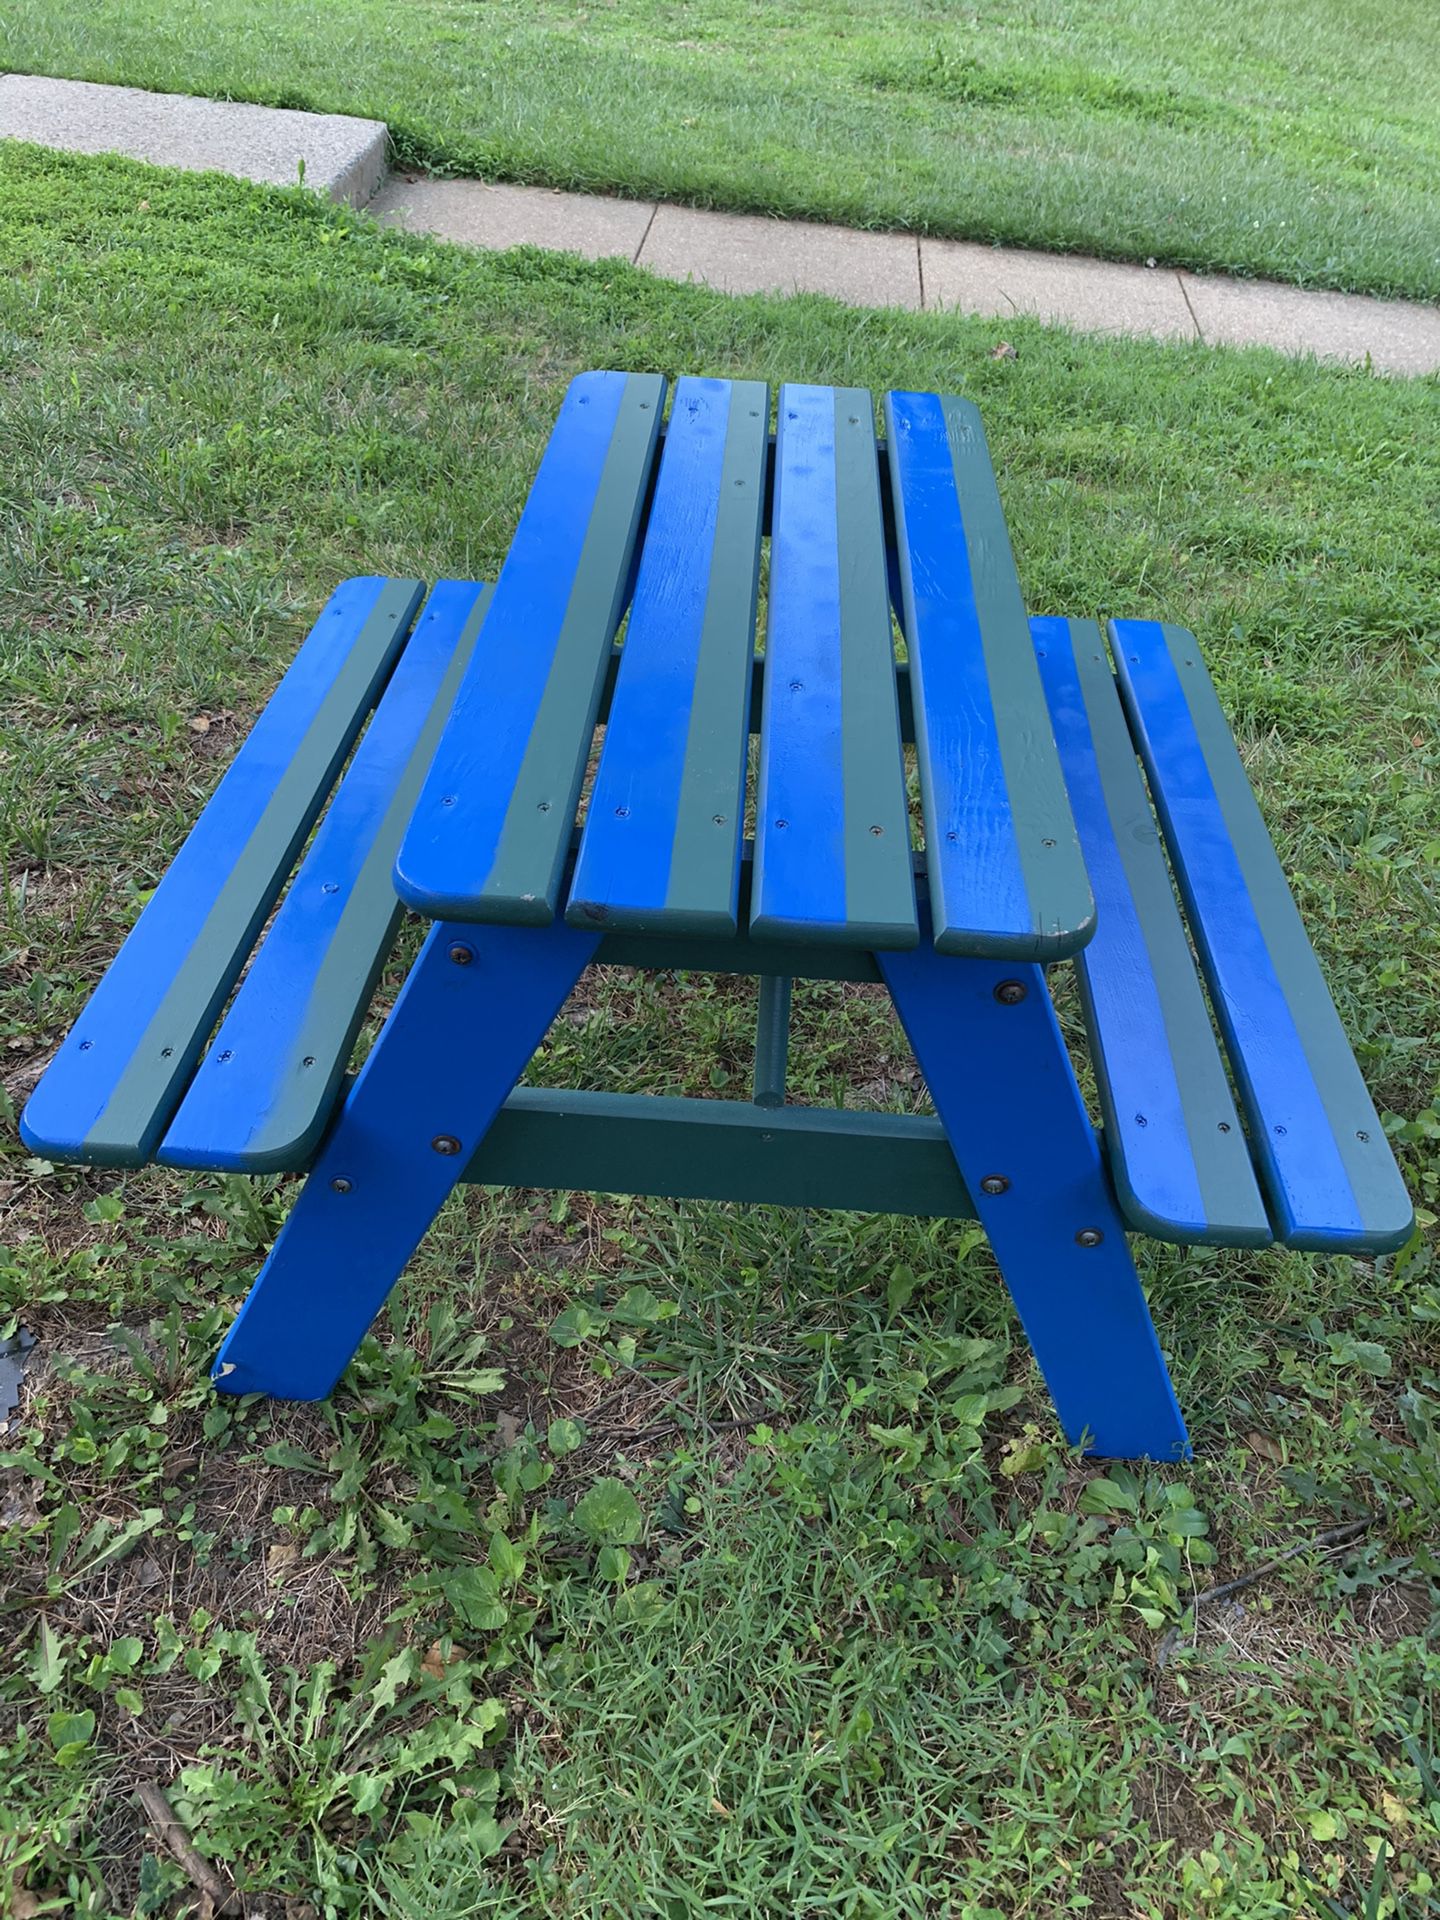 Outdoor Picnic Table for Kids ( in Great Condition) plz see all pictures for measurements